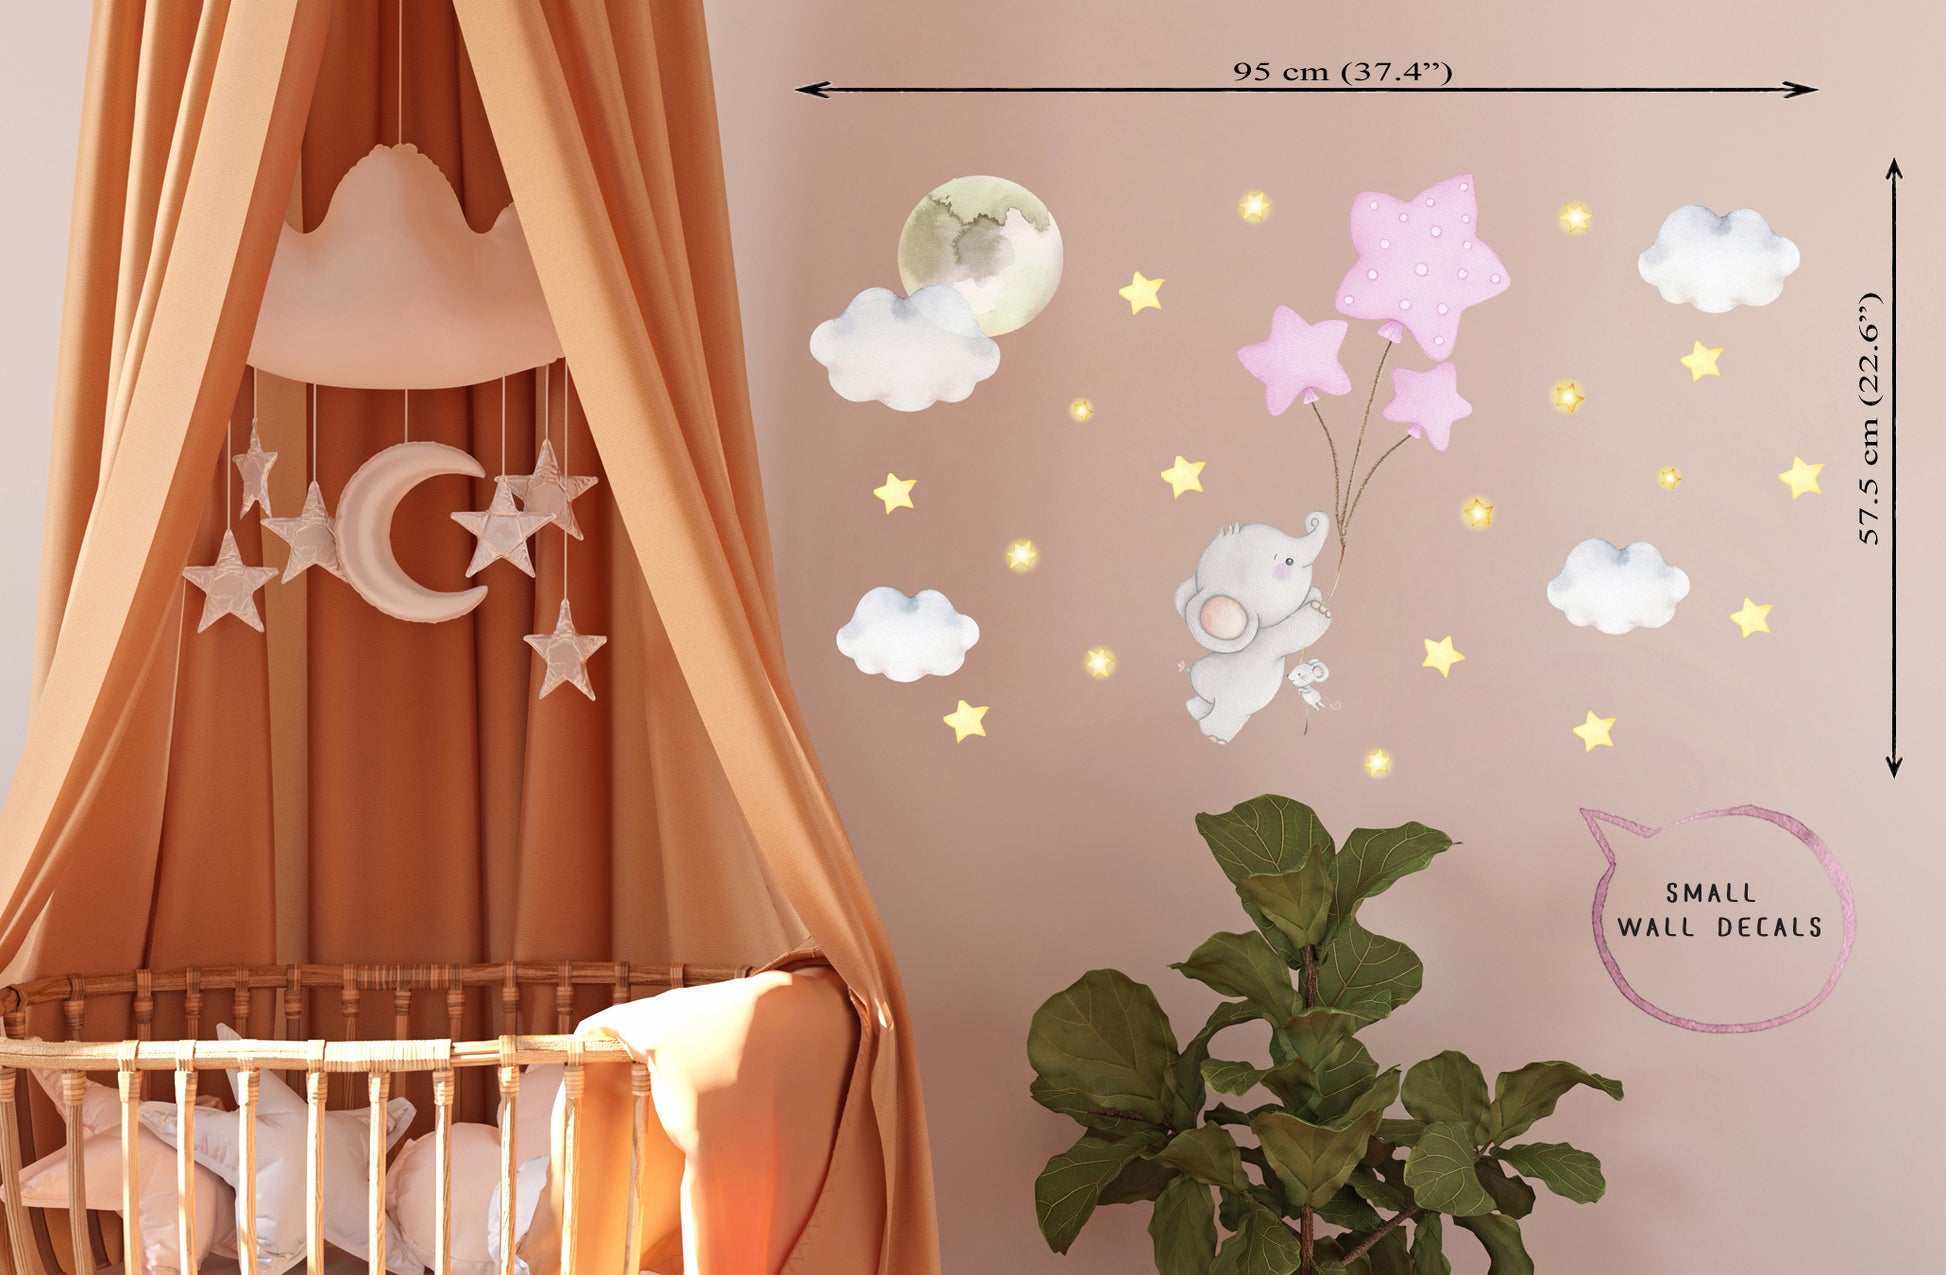 Elephant with balloons. Small wall decals for baby room. Gold stars.